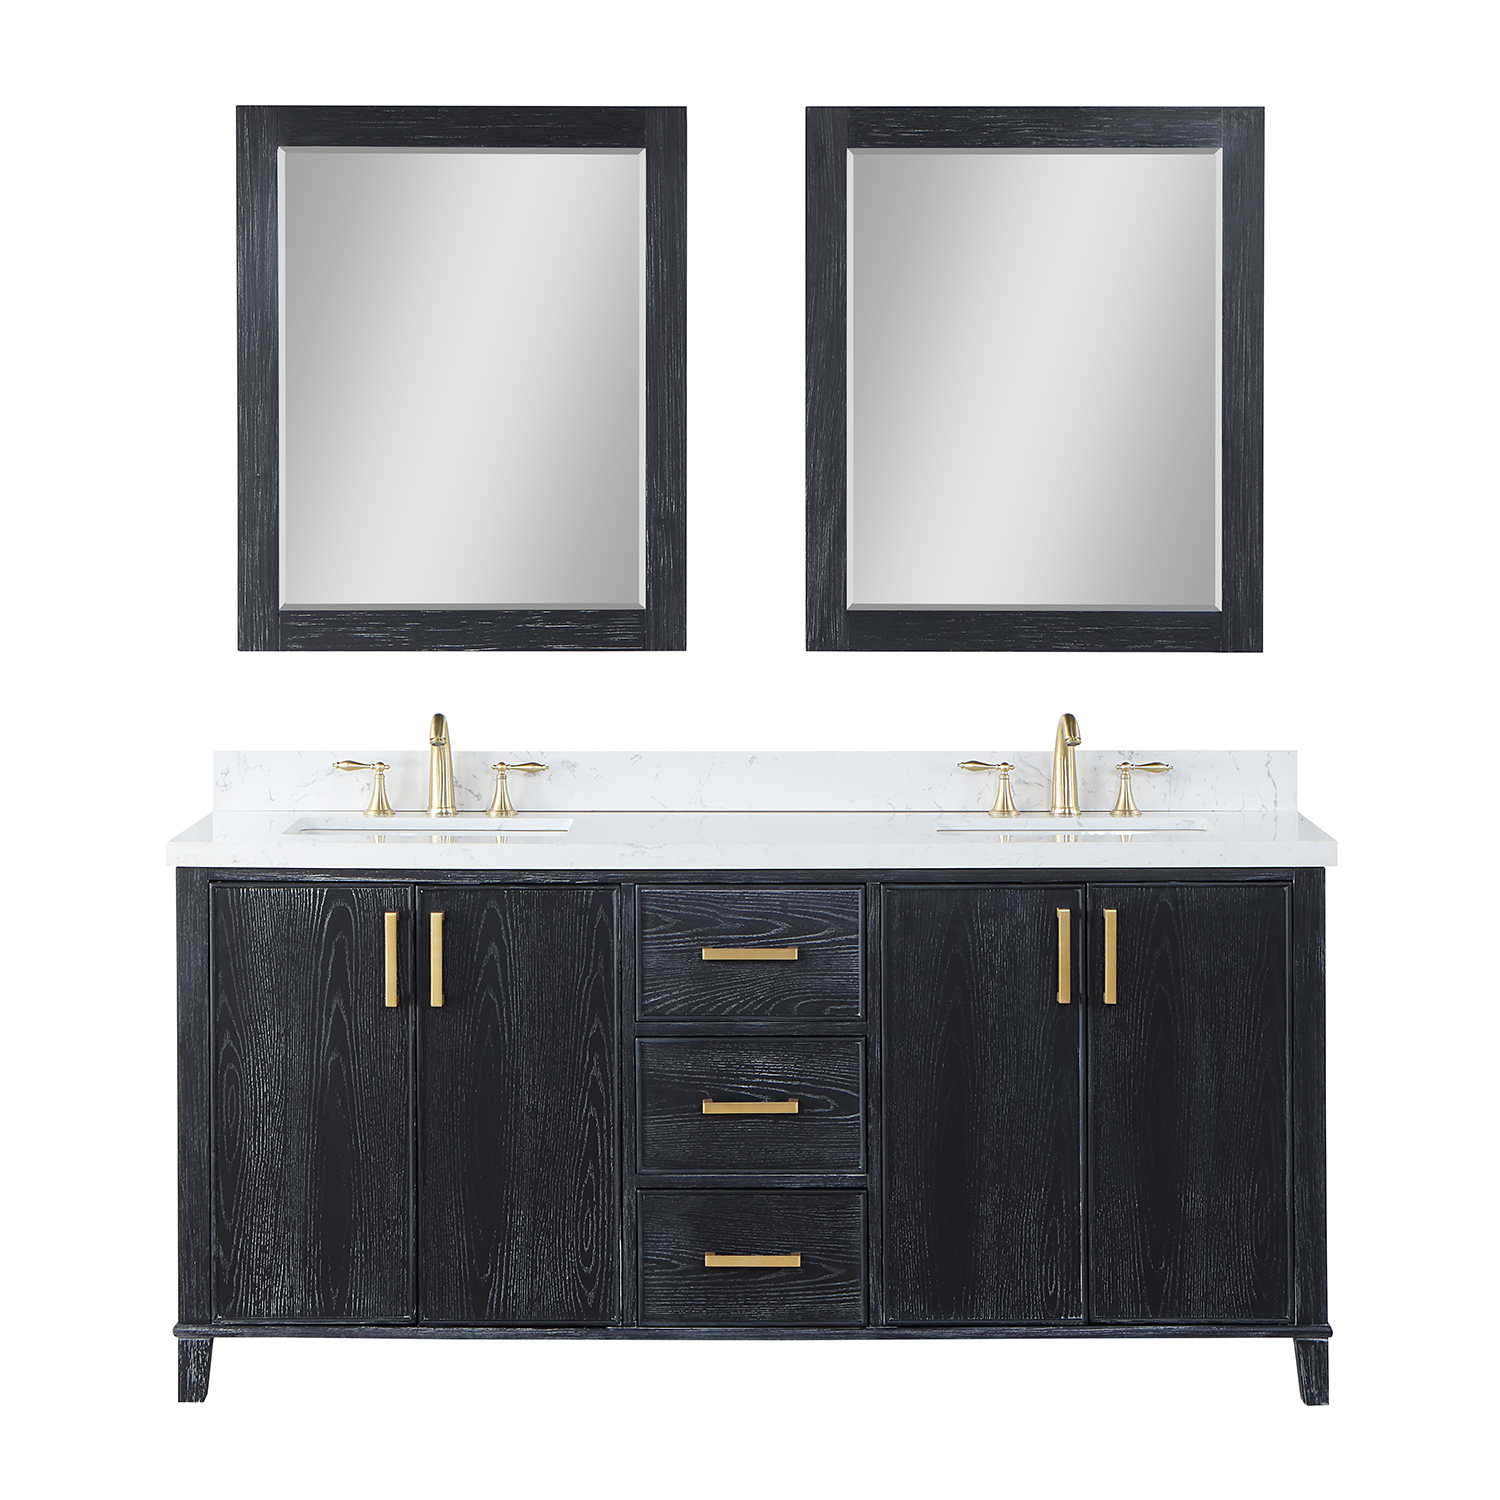 Issac Edwards Collection 72" Double Bathroom Vanity in Black Oak with Carrara White Composite Stone Countertop without Mirror